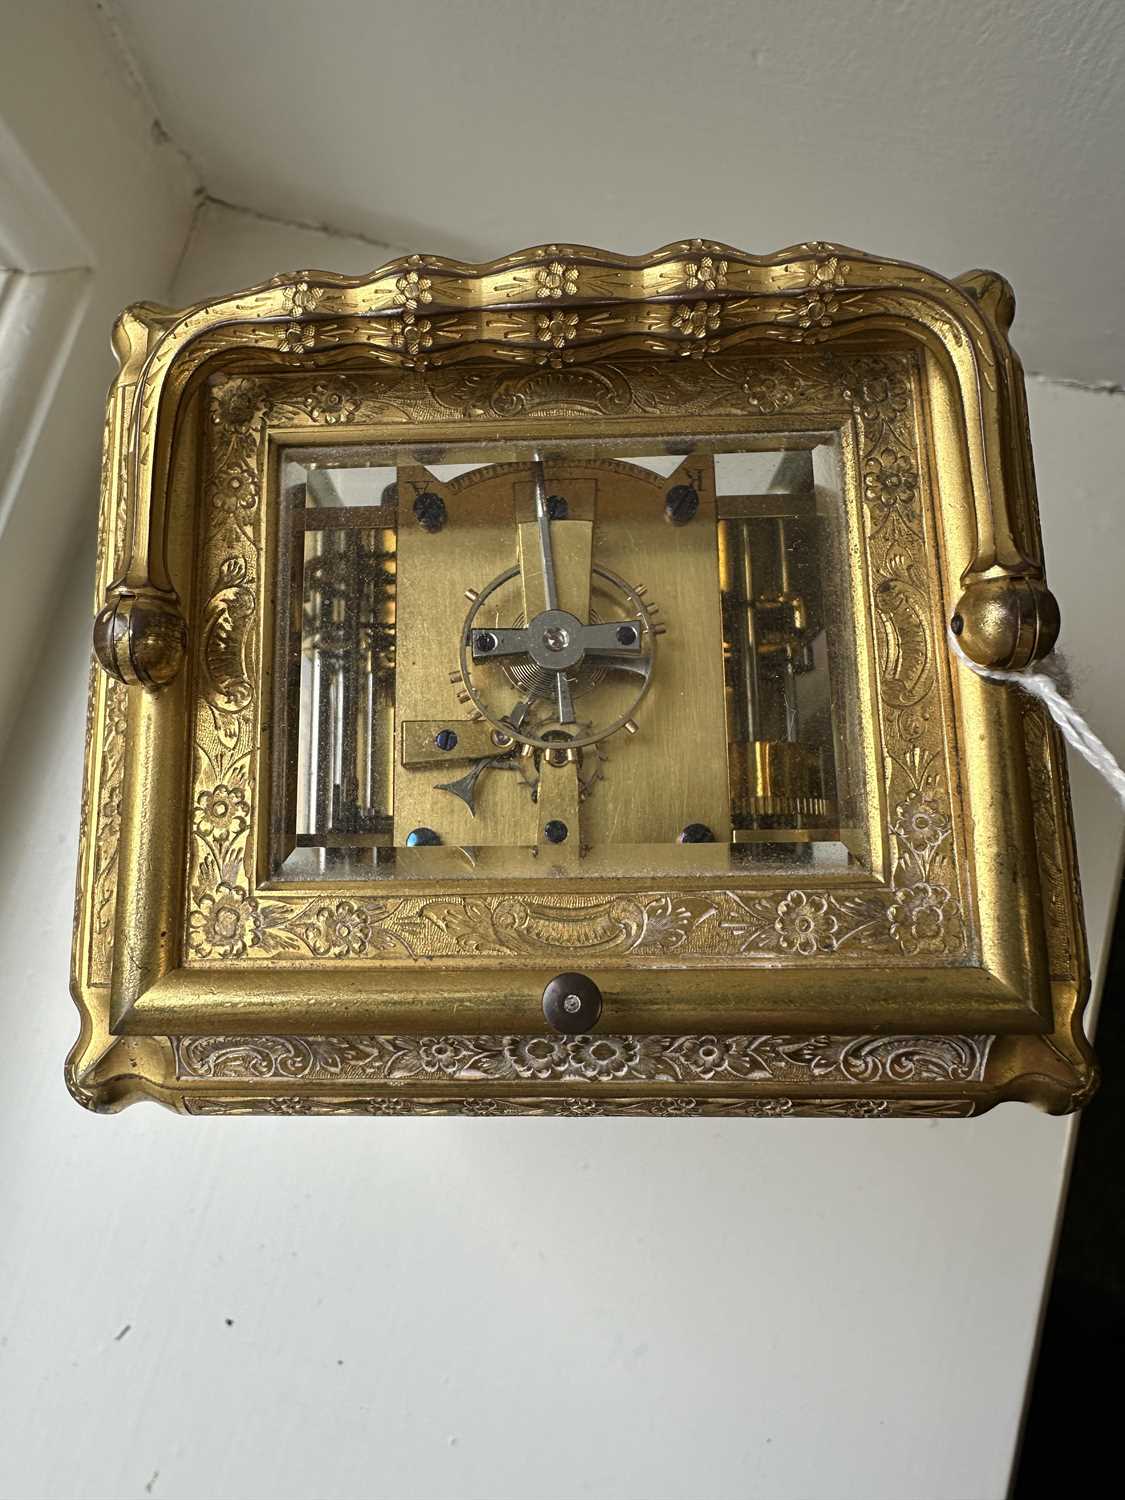 HENRI JACOT, PARIS. A LATE 19TH CENTURY FRENCH GRAND SONNERIE CARRIAGE CLOCK - Image 17 of 20